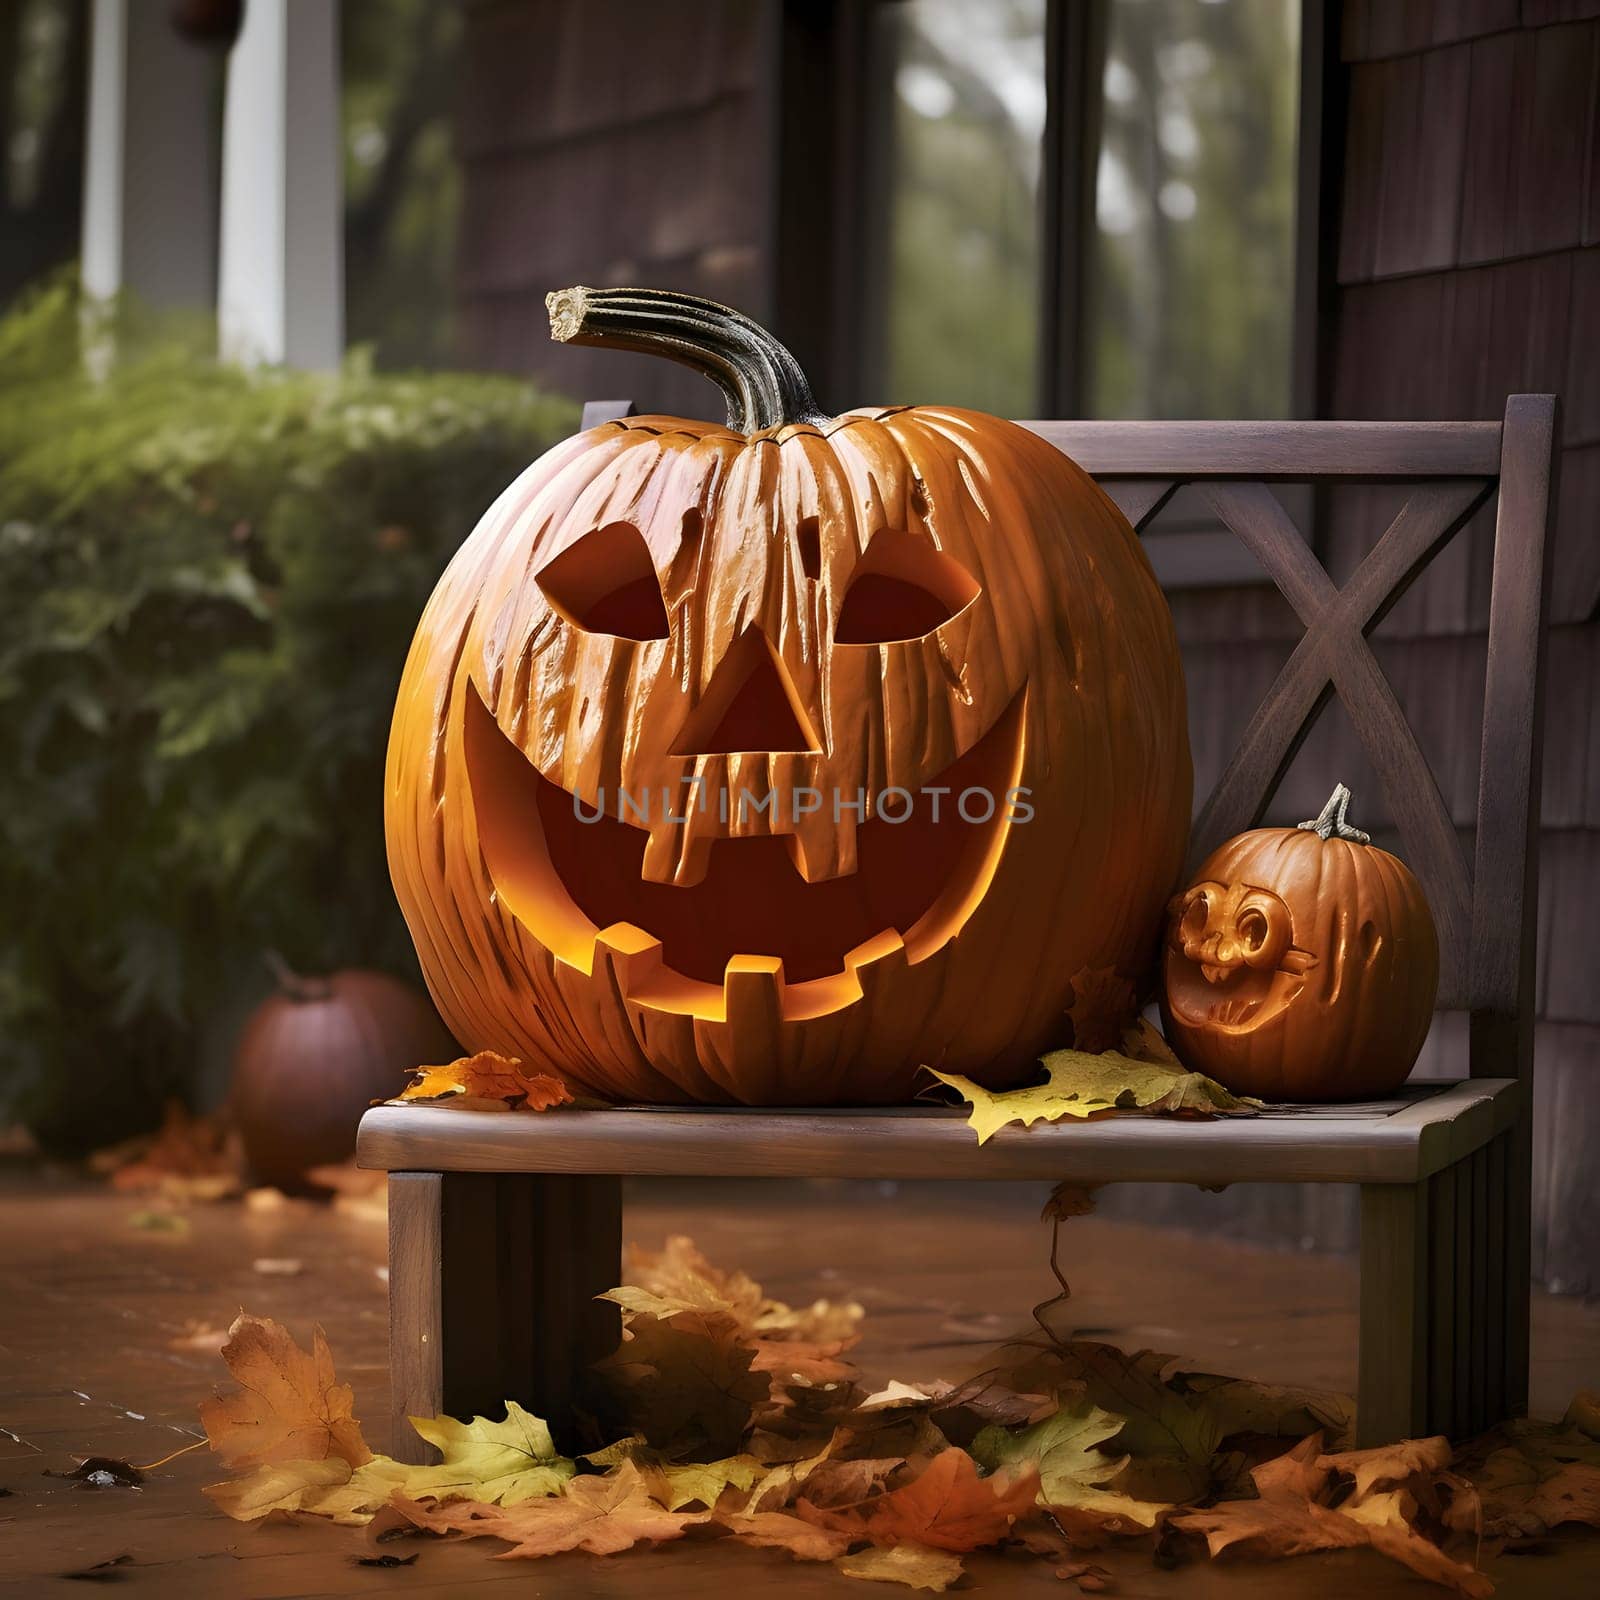 A larger and smaller jack-o-lantern pumpkin on a wooden bench all around autumn maple leaves, a Halloween image. Atmosphere of darkness and fear.